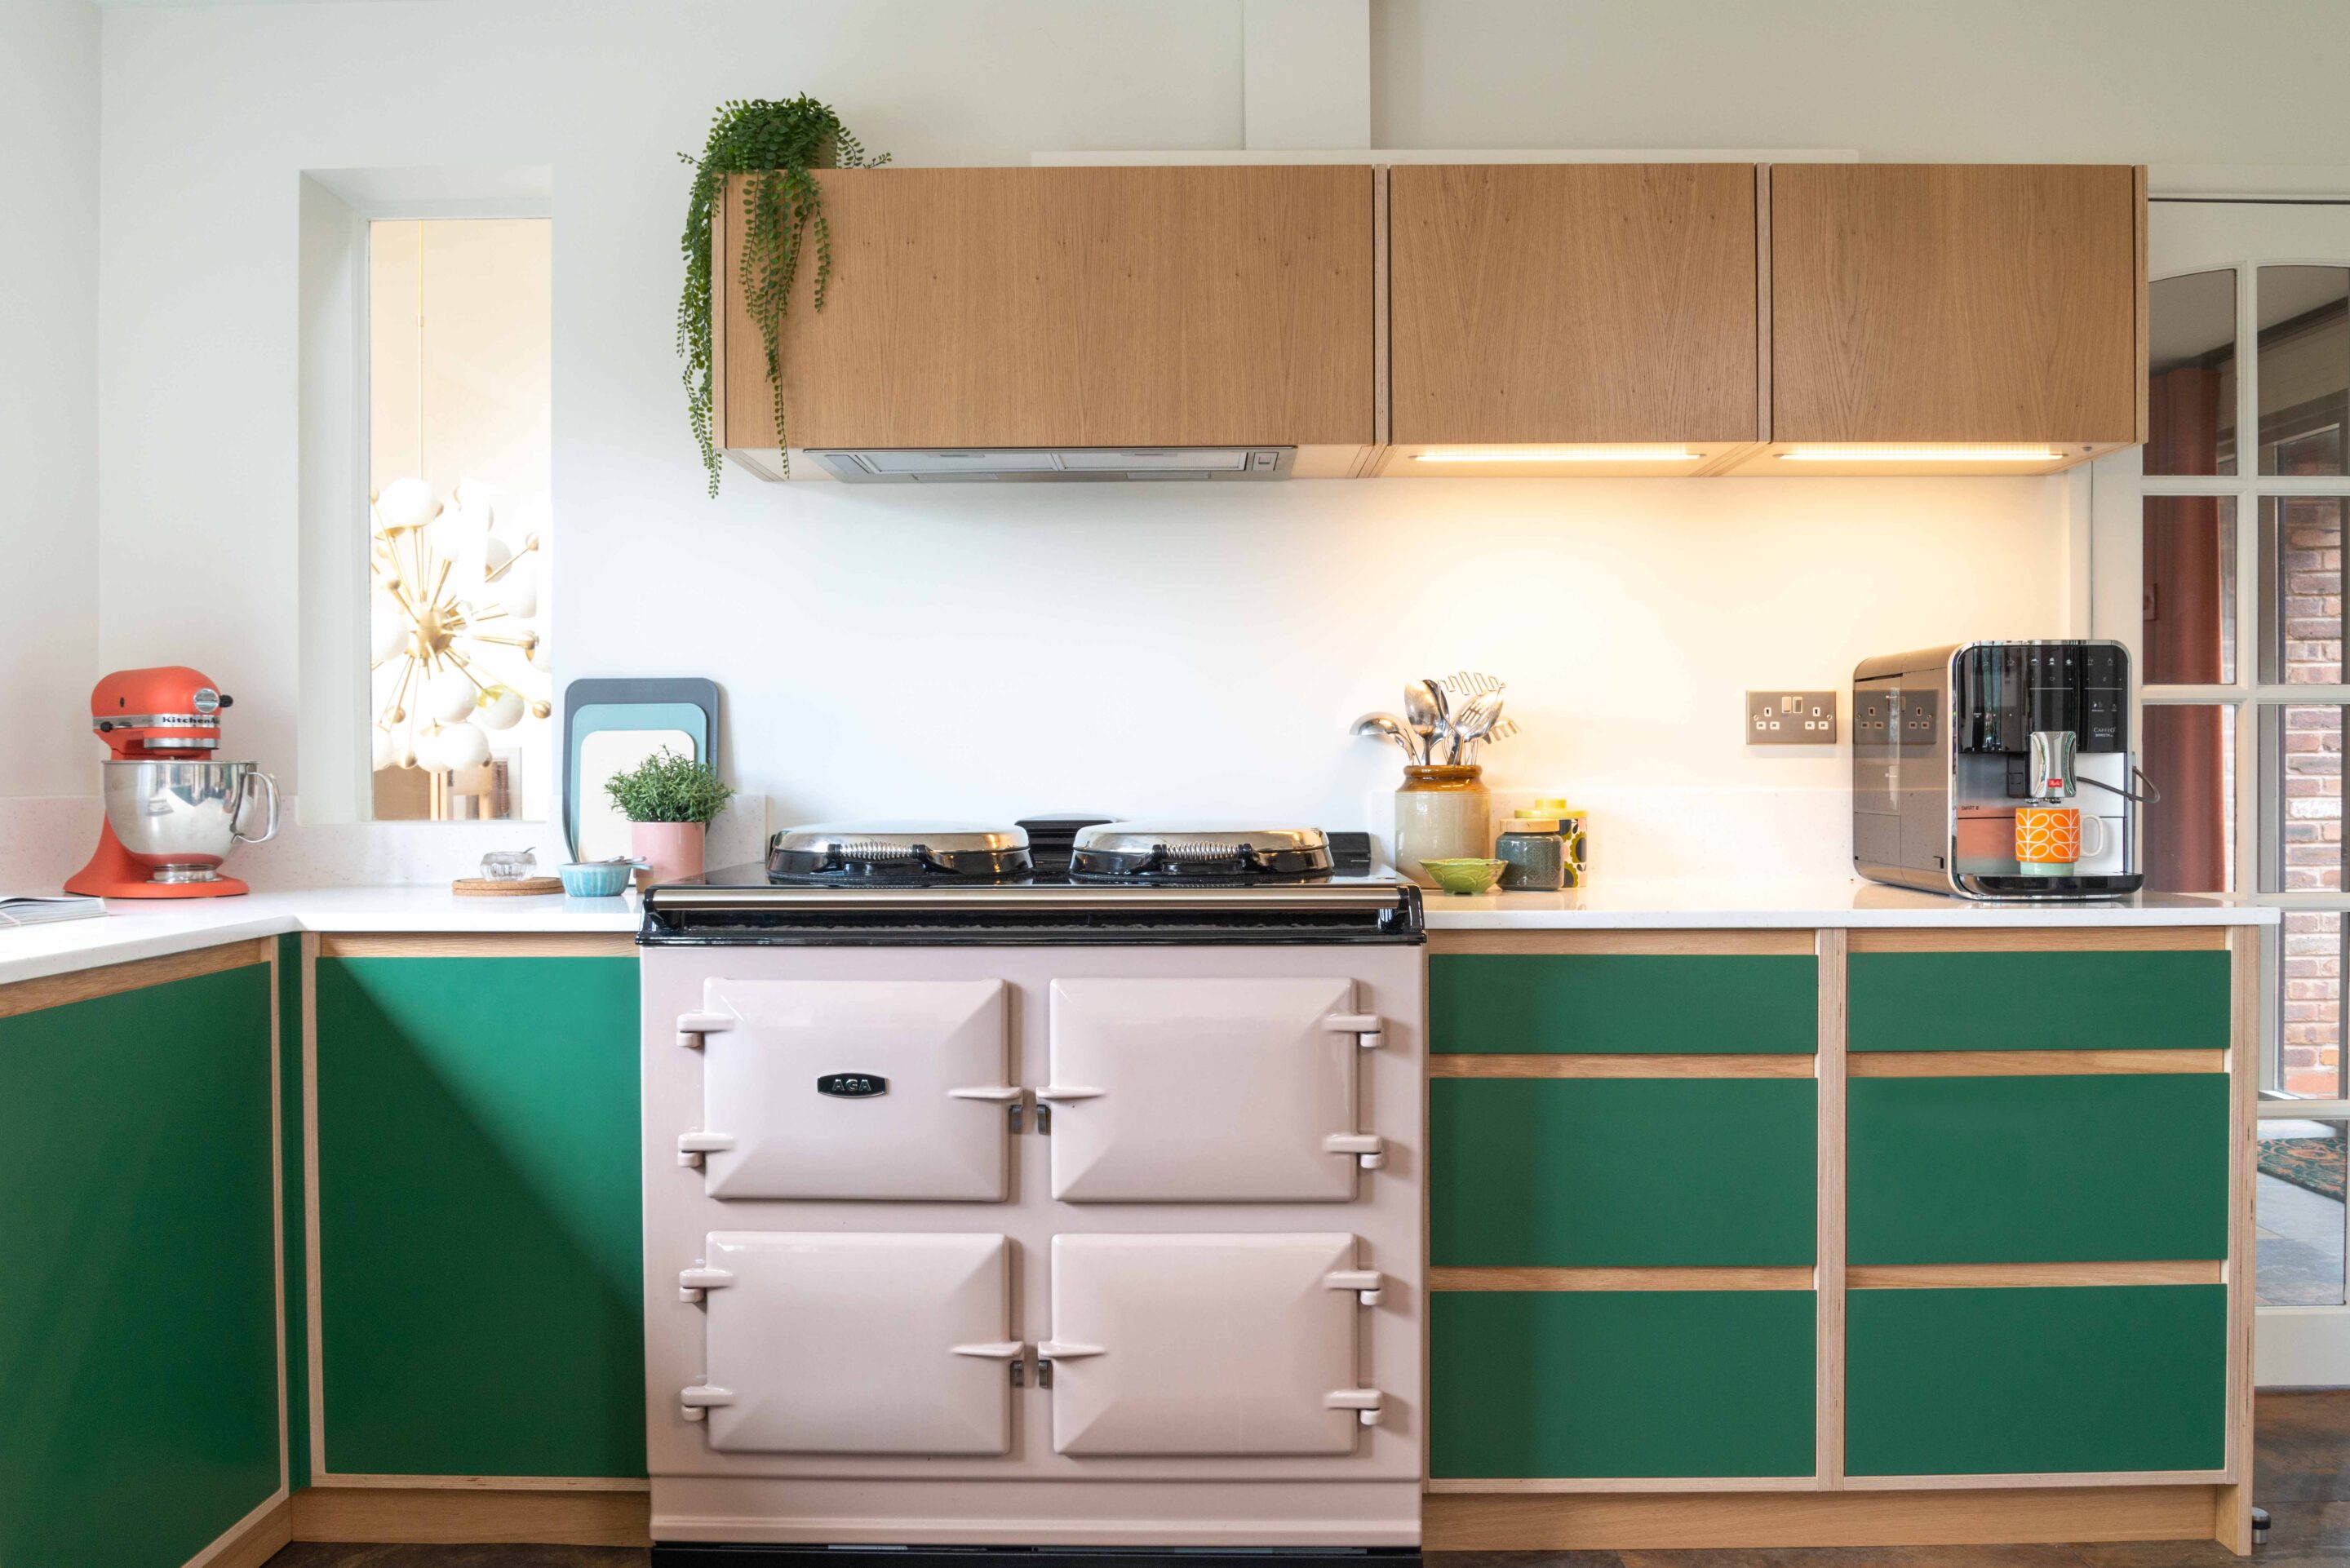 A run of kitchen units with wall mounted cabinets and a pink Aga